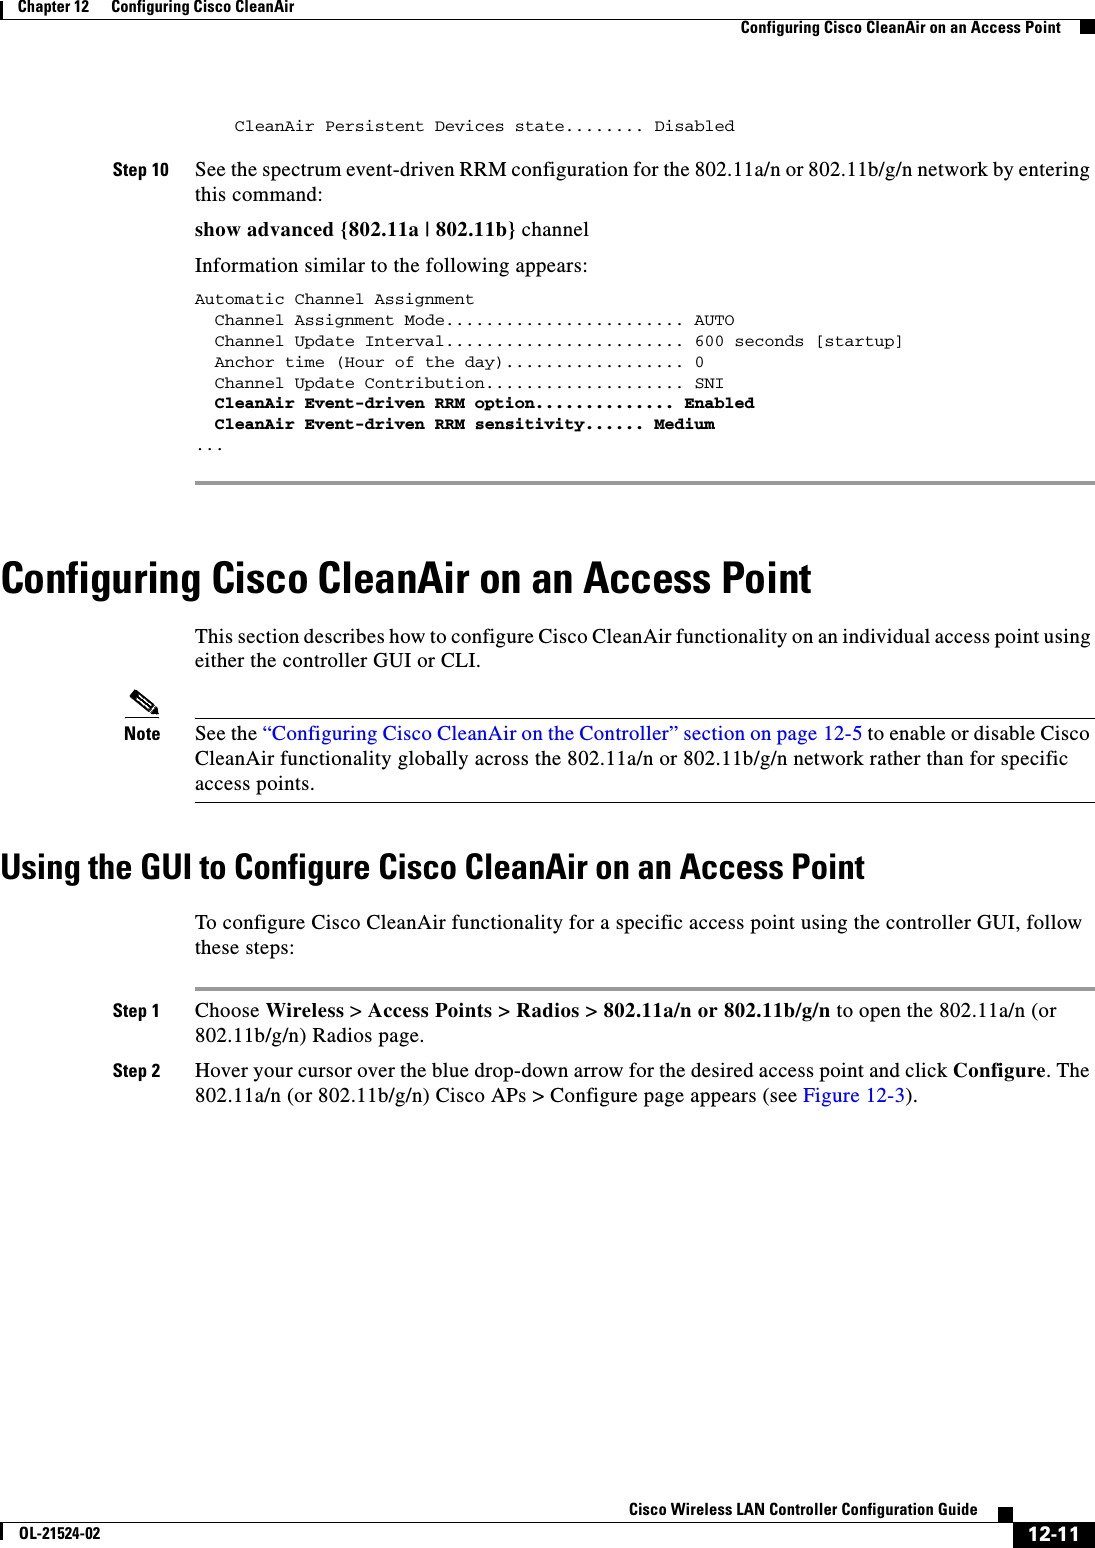  12-11Cisco Wireless LAN Controller Configuration GuideOL-21524-02Chapter 12      Configuring Cisco CleanAirConfiguring Cisco CleanAir on an Access Point    CleanAir Persistent Devices state........ Disabled Step 10 See the spectrum event-driven RRM configuration for the 802.11a/n or 802.11b/g/n network by entering this command:show advanced {802.11a | 802.11b} channelInformation similar to the following appears:Automatic Channel Assignment  Channel Assignment Mode........................ AUTO  Channel Update Interval........................ 600 seconds [startup]  Anchor time (Hour of the day).................. 0  Channel Update Contribution.................... SNI  CleanAir Event-driven RRM option.............. Enabled  CleanAir Event-driven RRM sensitivity...... Medium ... Configuring Cisco CleanAir on an Access PointThis section describes how to configure Cisco CleanAir functionality on an individual access point using either the controller GUI or CLI.Note See the “Configuring Cisco CleanAir on the Controller” section on page 12-5 to enable or disable Cisco CleanAir functionality globally across the 802.11a/n or 802.11b/g/n network rather than for specific access points.Using the GUI to Configure Cisco CleanAir on an Access PointTo configure Cisco CleanAir functionality for a specific access point using the controller GUI, follow these steps:Step 1 Choose Wireless &gt; Access Points &gt; Radios &gt; 802.11a/n or 802.11b/g/n to open the 802.11a/n (or 802.11b/g/n) Radios page.Step 2 Hover your cursor over the blue drop-down arrow for the desired access point and click Configure. The 802.11a/n (or 802.11b/g/n) Cisco APs &gt; Configure page appears (see Figure 12-3).